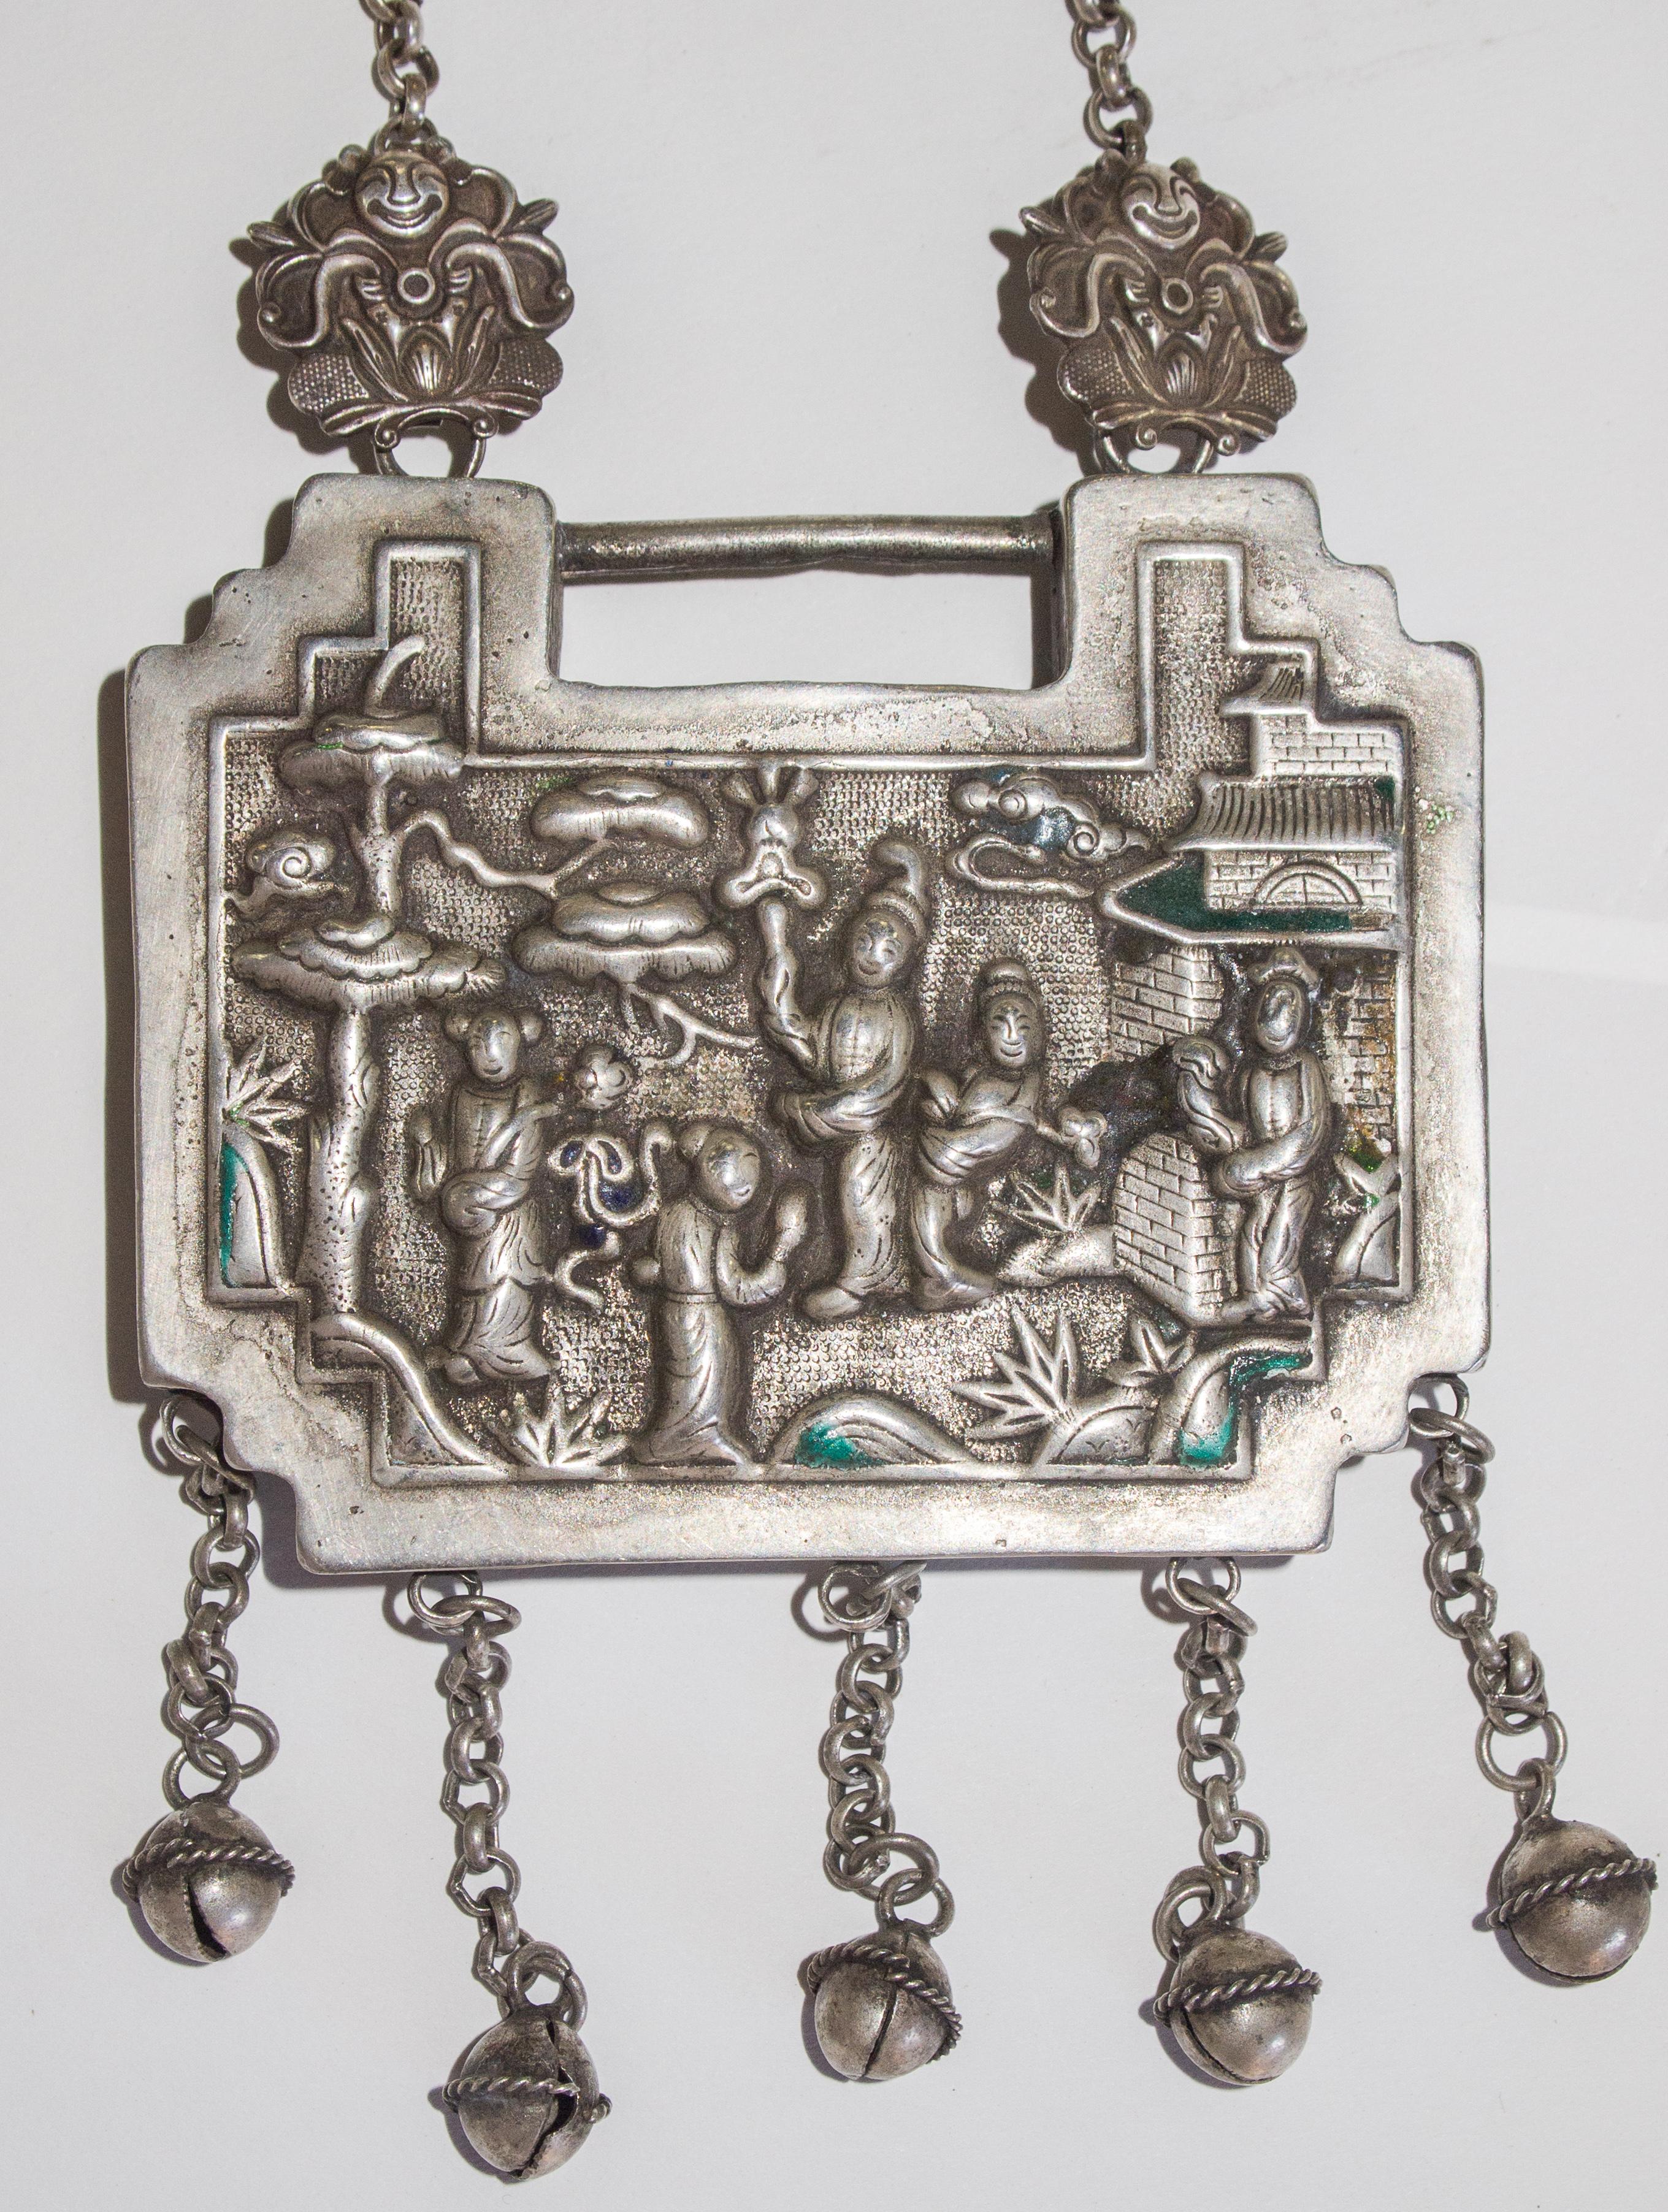 Child Amulet Lock, Silver Alloy, Yao or Hmong of SW China, Early 20th Century 4